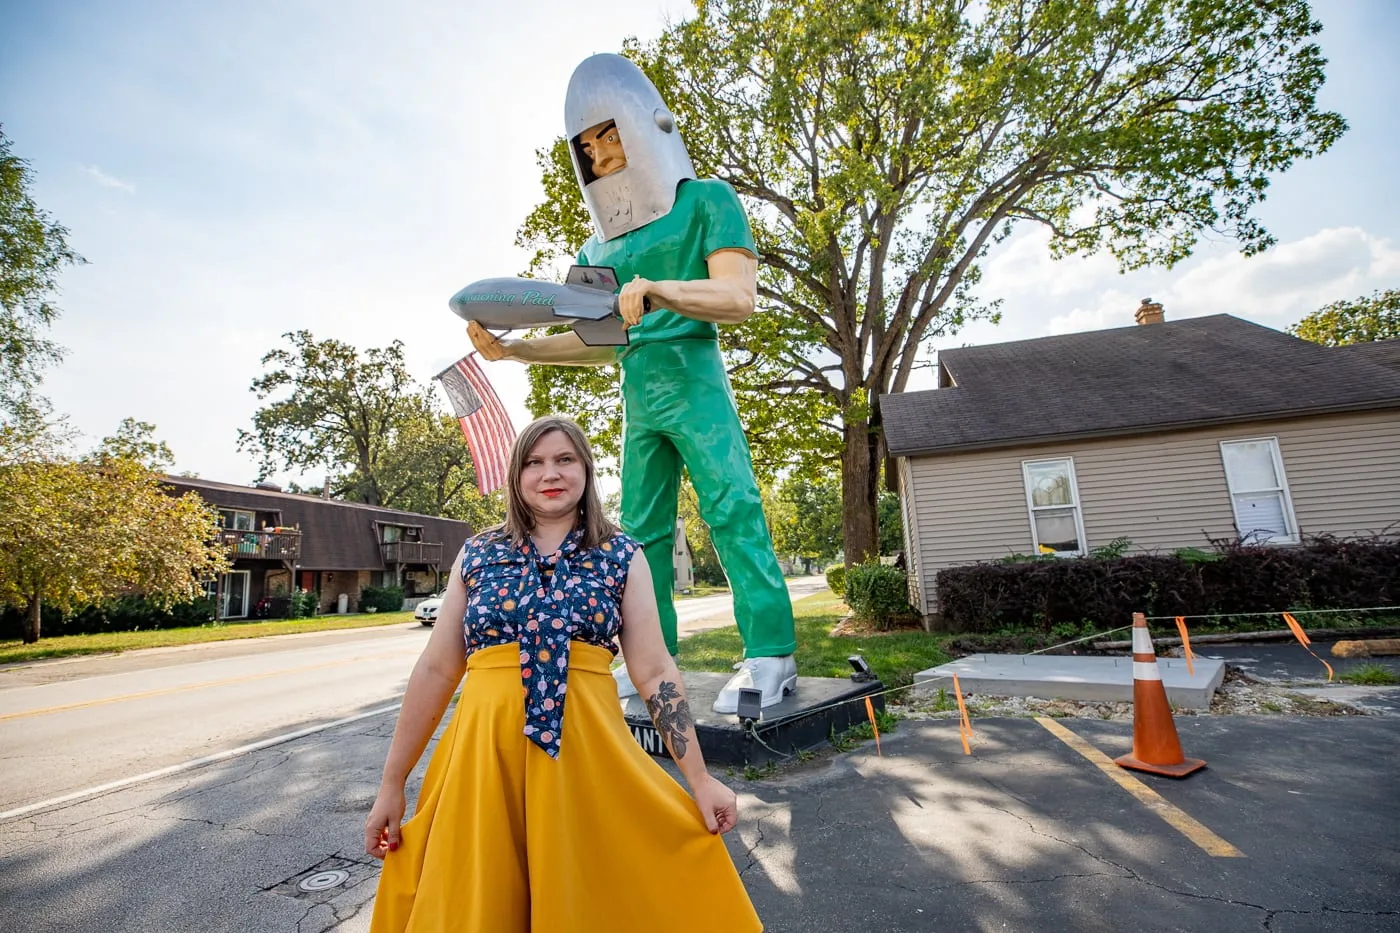 Gemini Giant muffler man at the Launching Pad in Wilmington, Illinois Route 66 roadside attraction